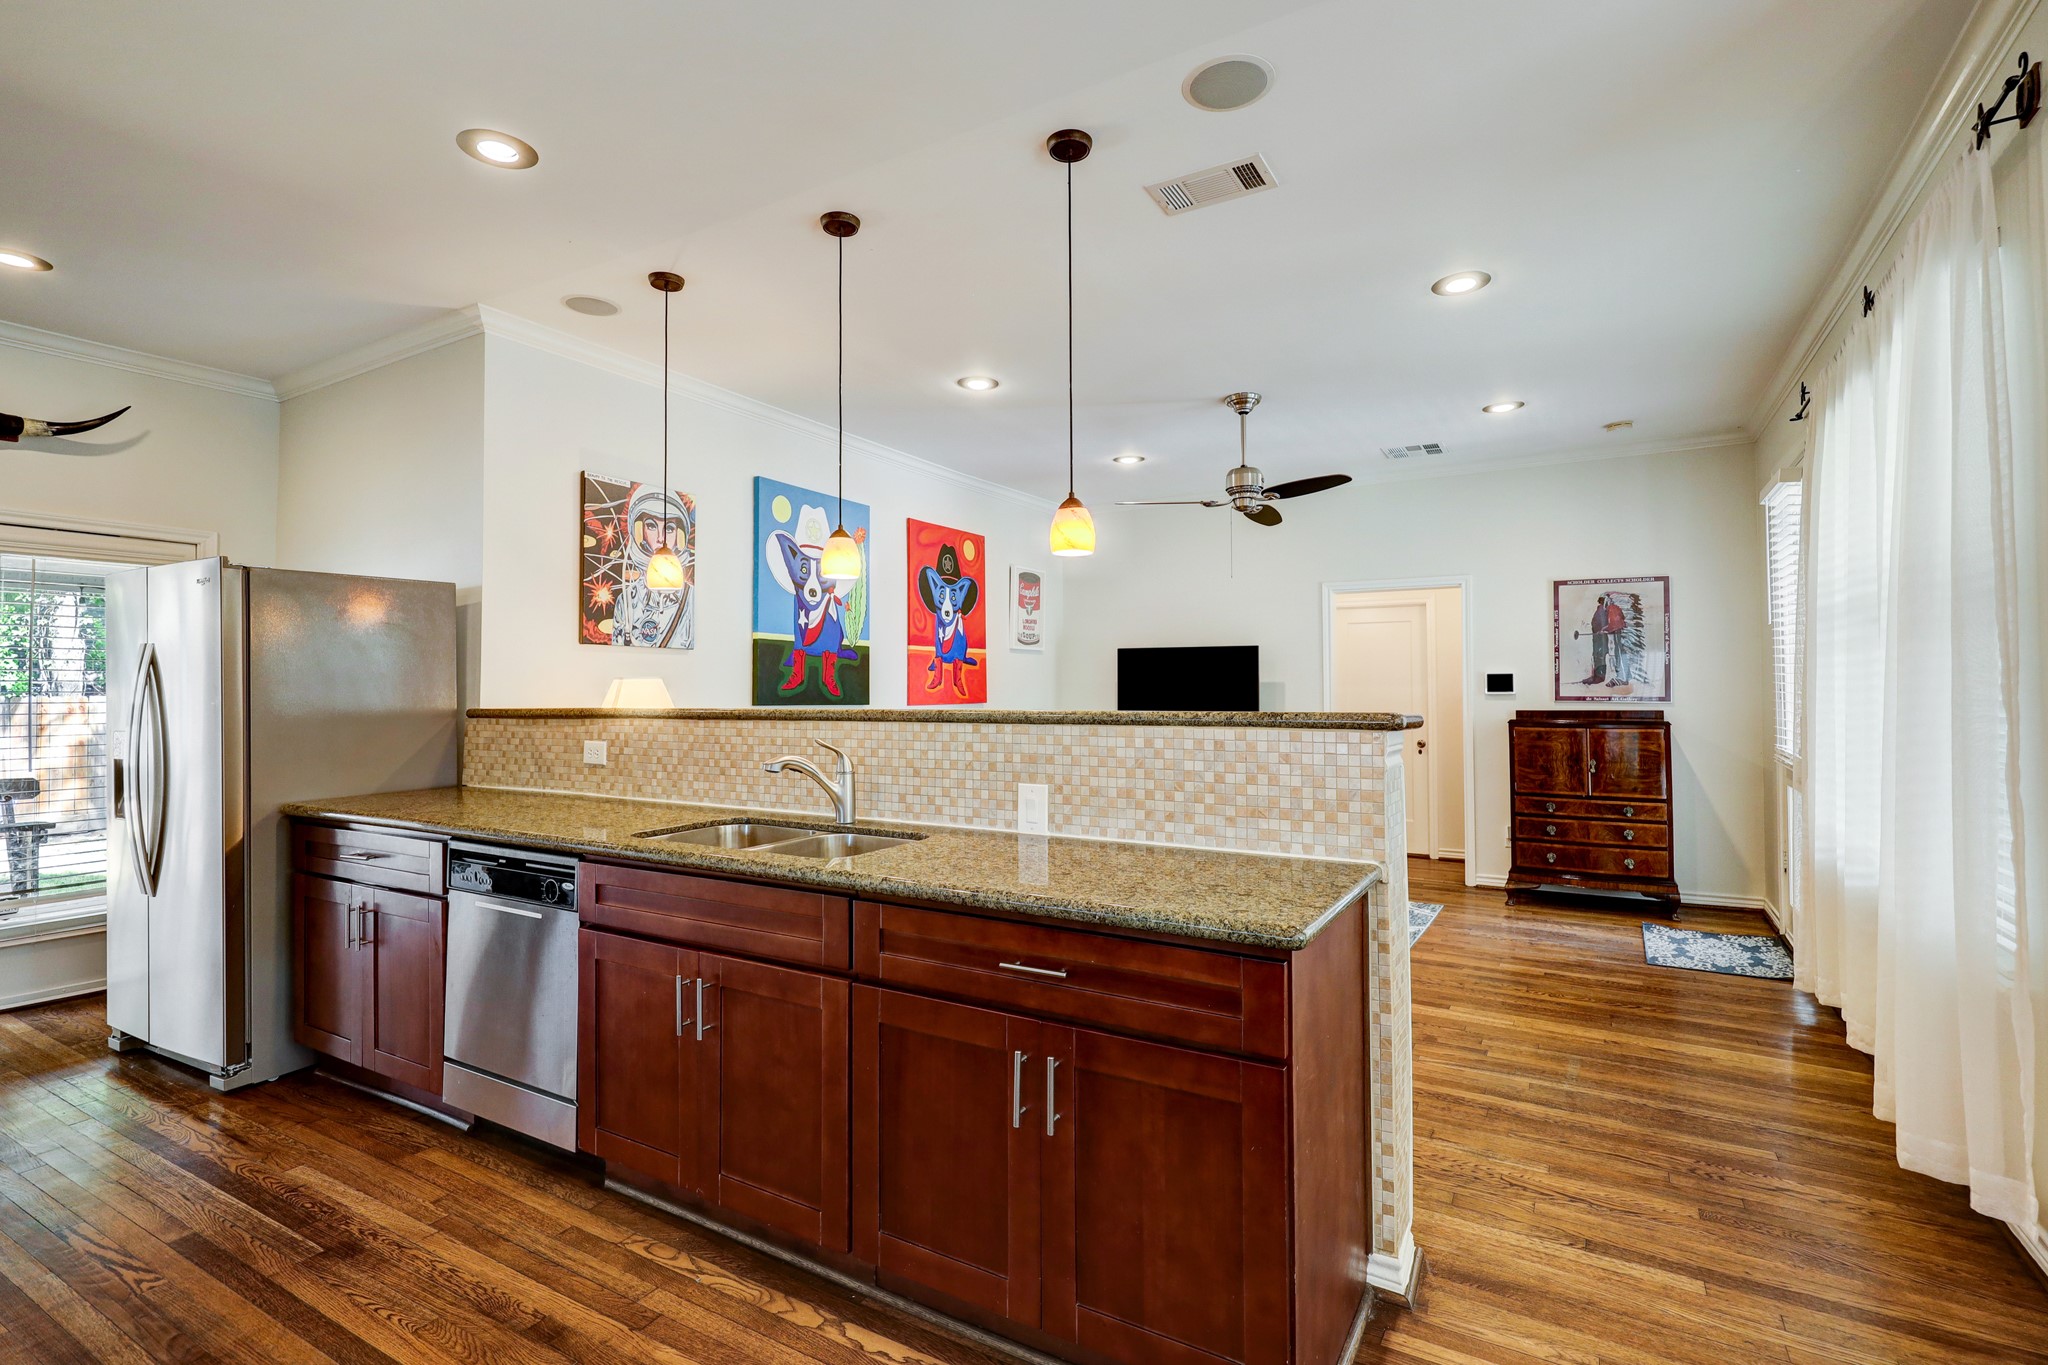 The spacious kitchen features stainless steel appliances, all included with the listing.